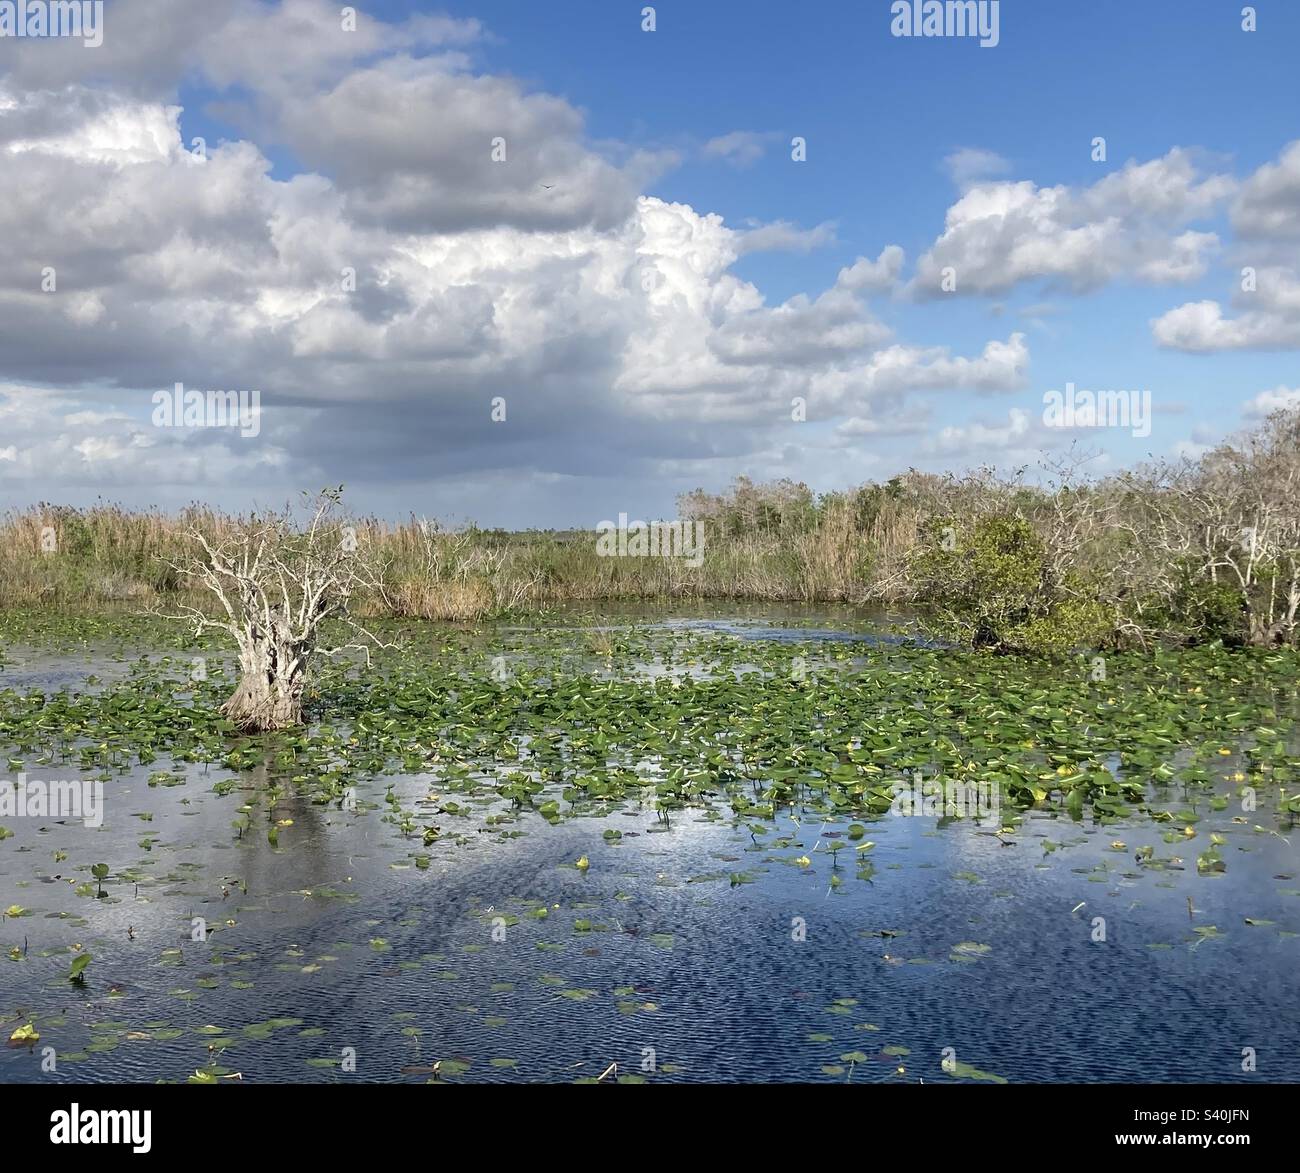 Landscape view of Everglades National Park from Anhinga Trail, near Homestead in South Florida Stock Photo